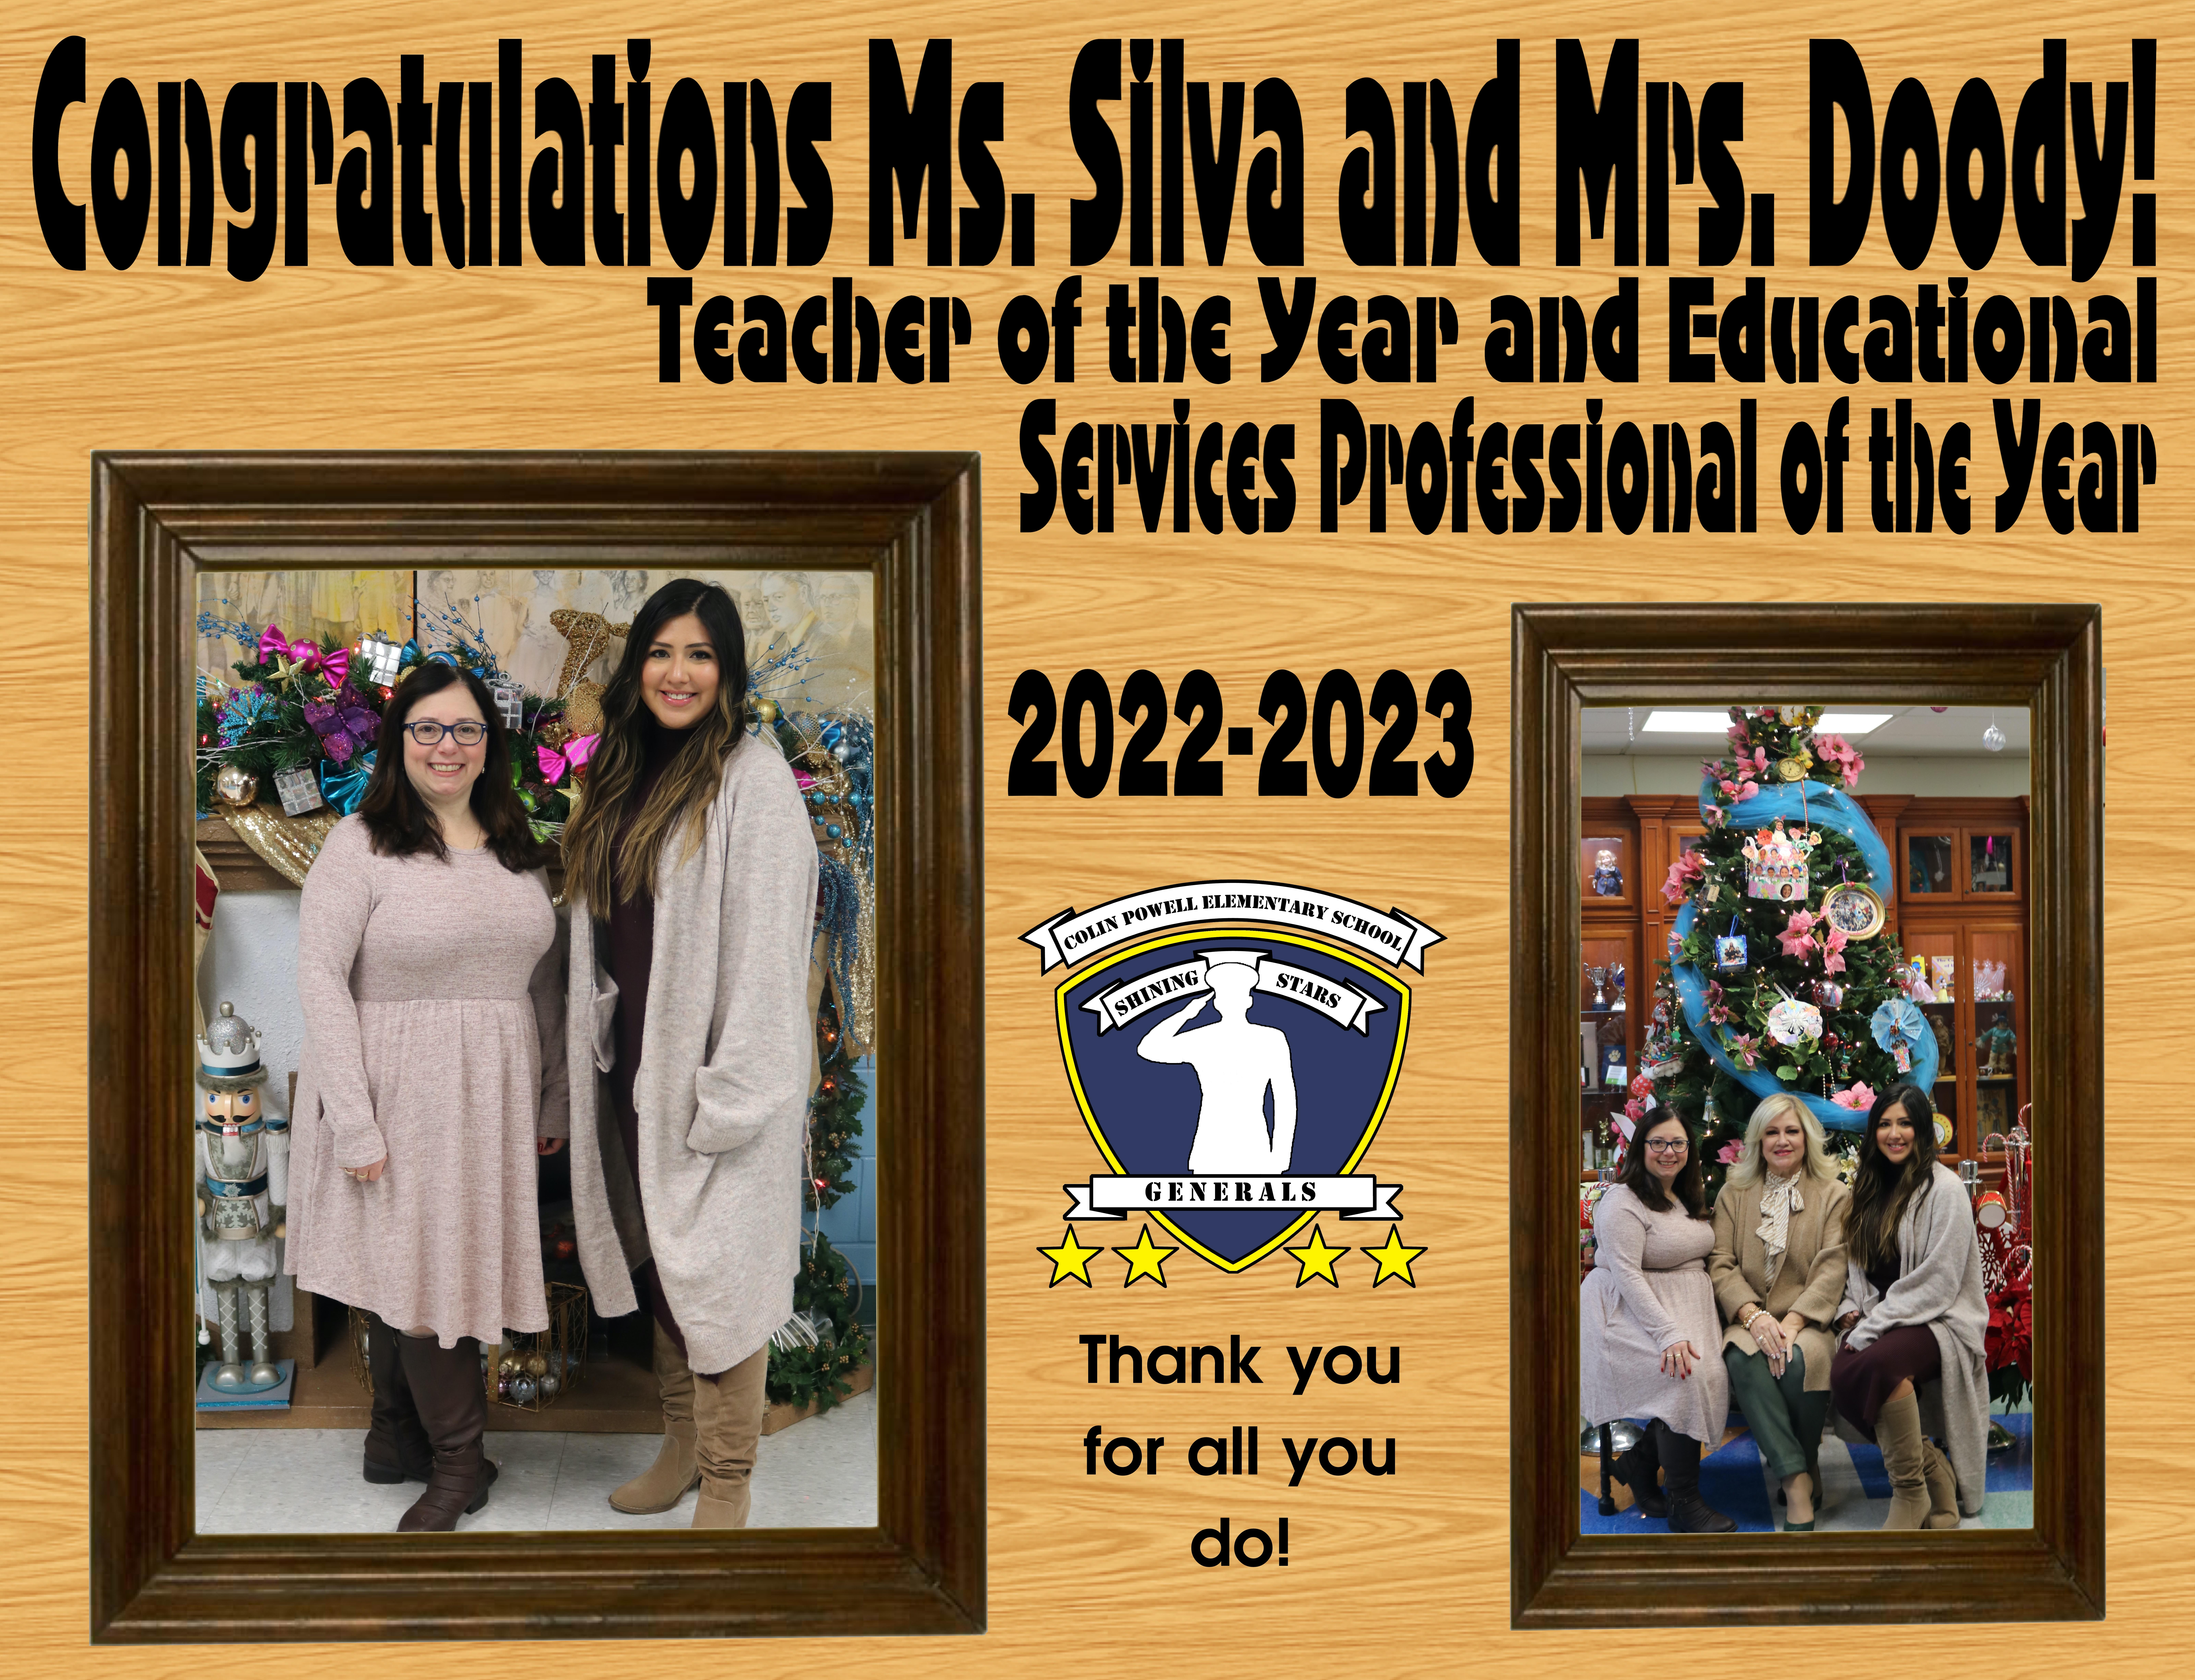 Congratulations to Christie Silva and Jeanette Doody